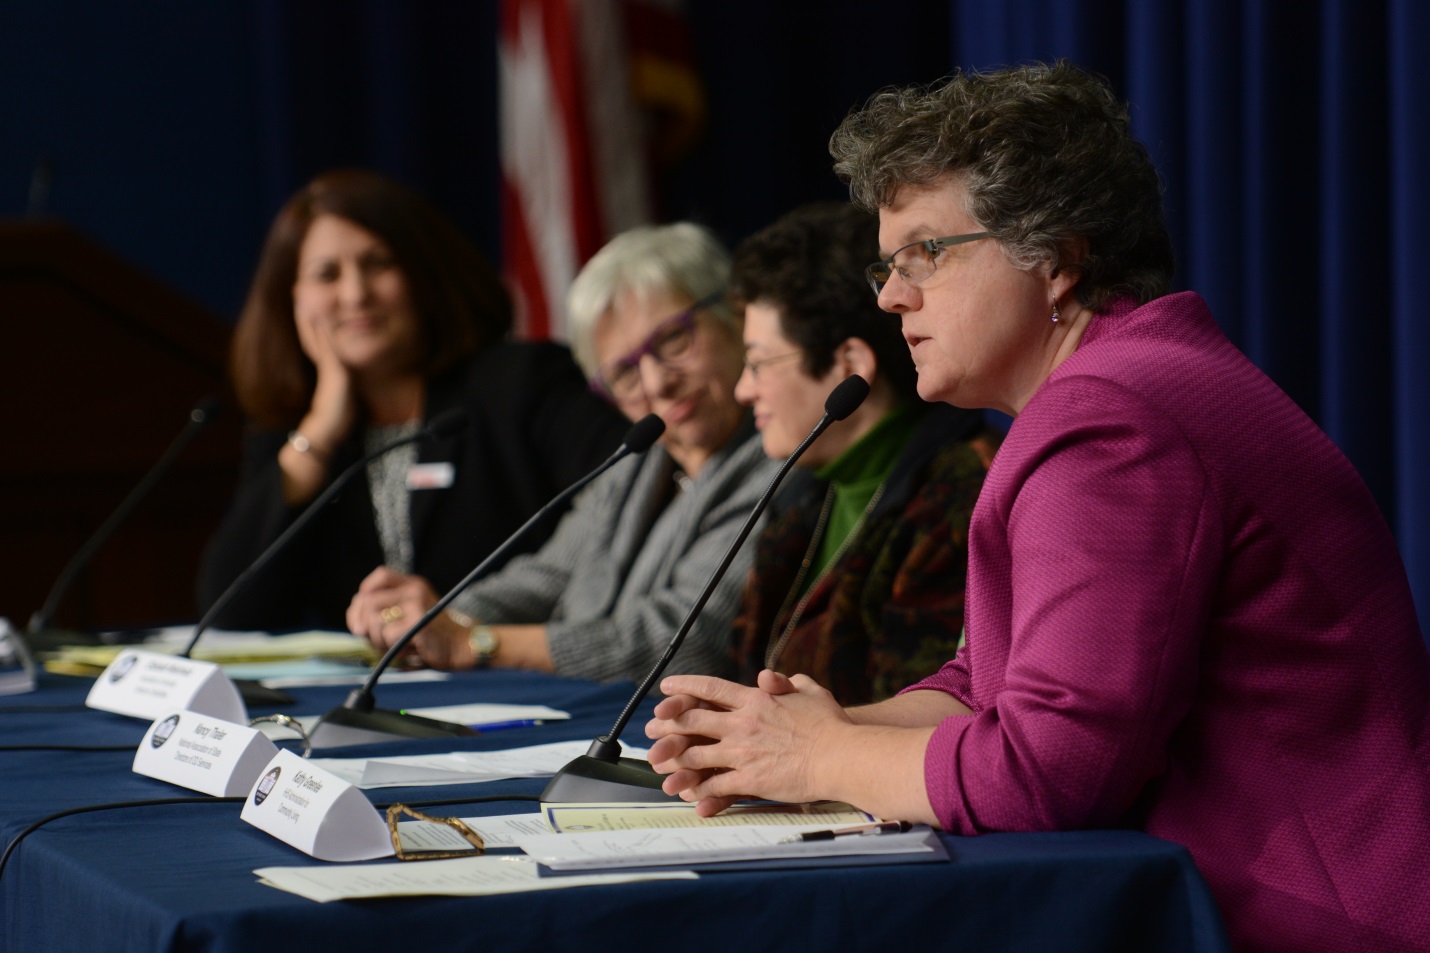 Kathy Greenlee, Assistant Secretary for Aging, U.S. Department of Health and Human Services, discusses long-term services and support. (Photo courtesy of the Department of Health and Human Services, Administration for Community Living)